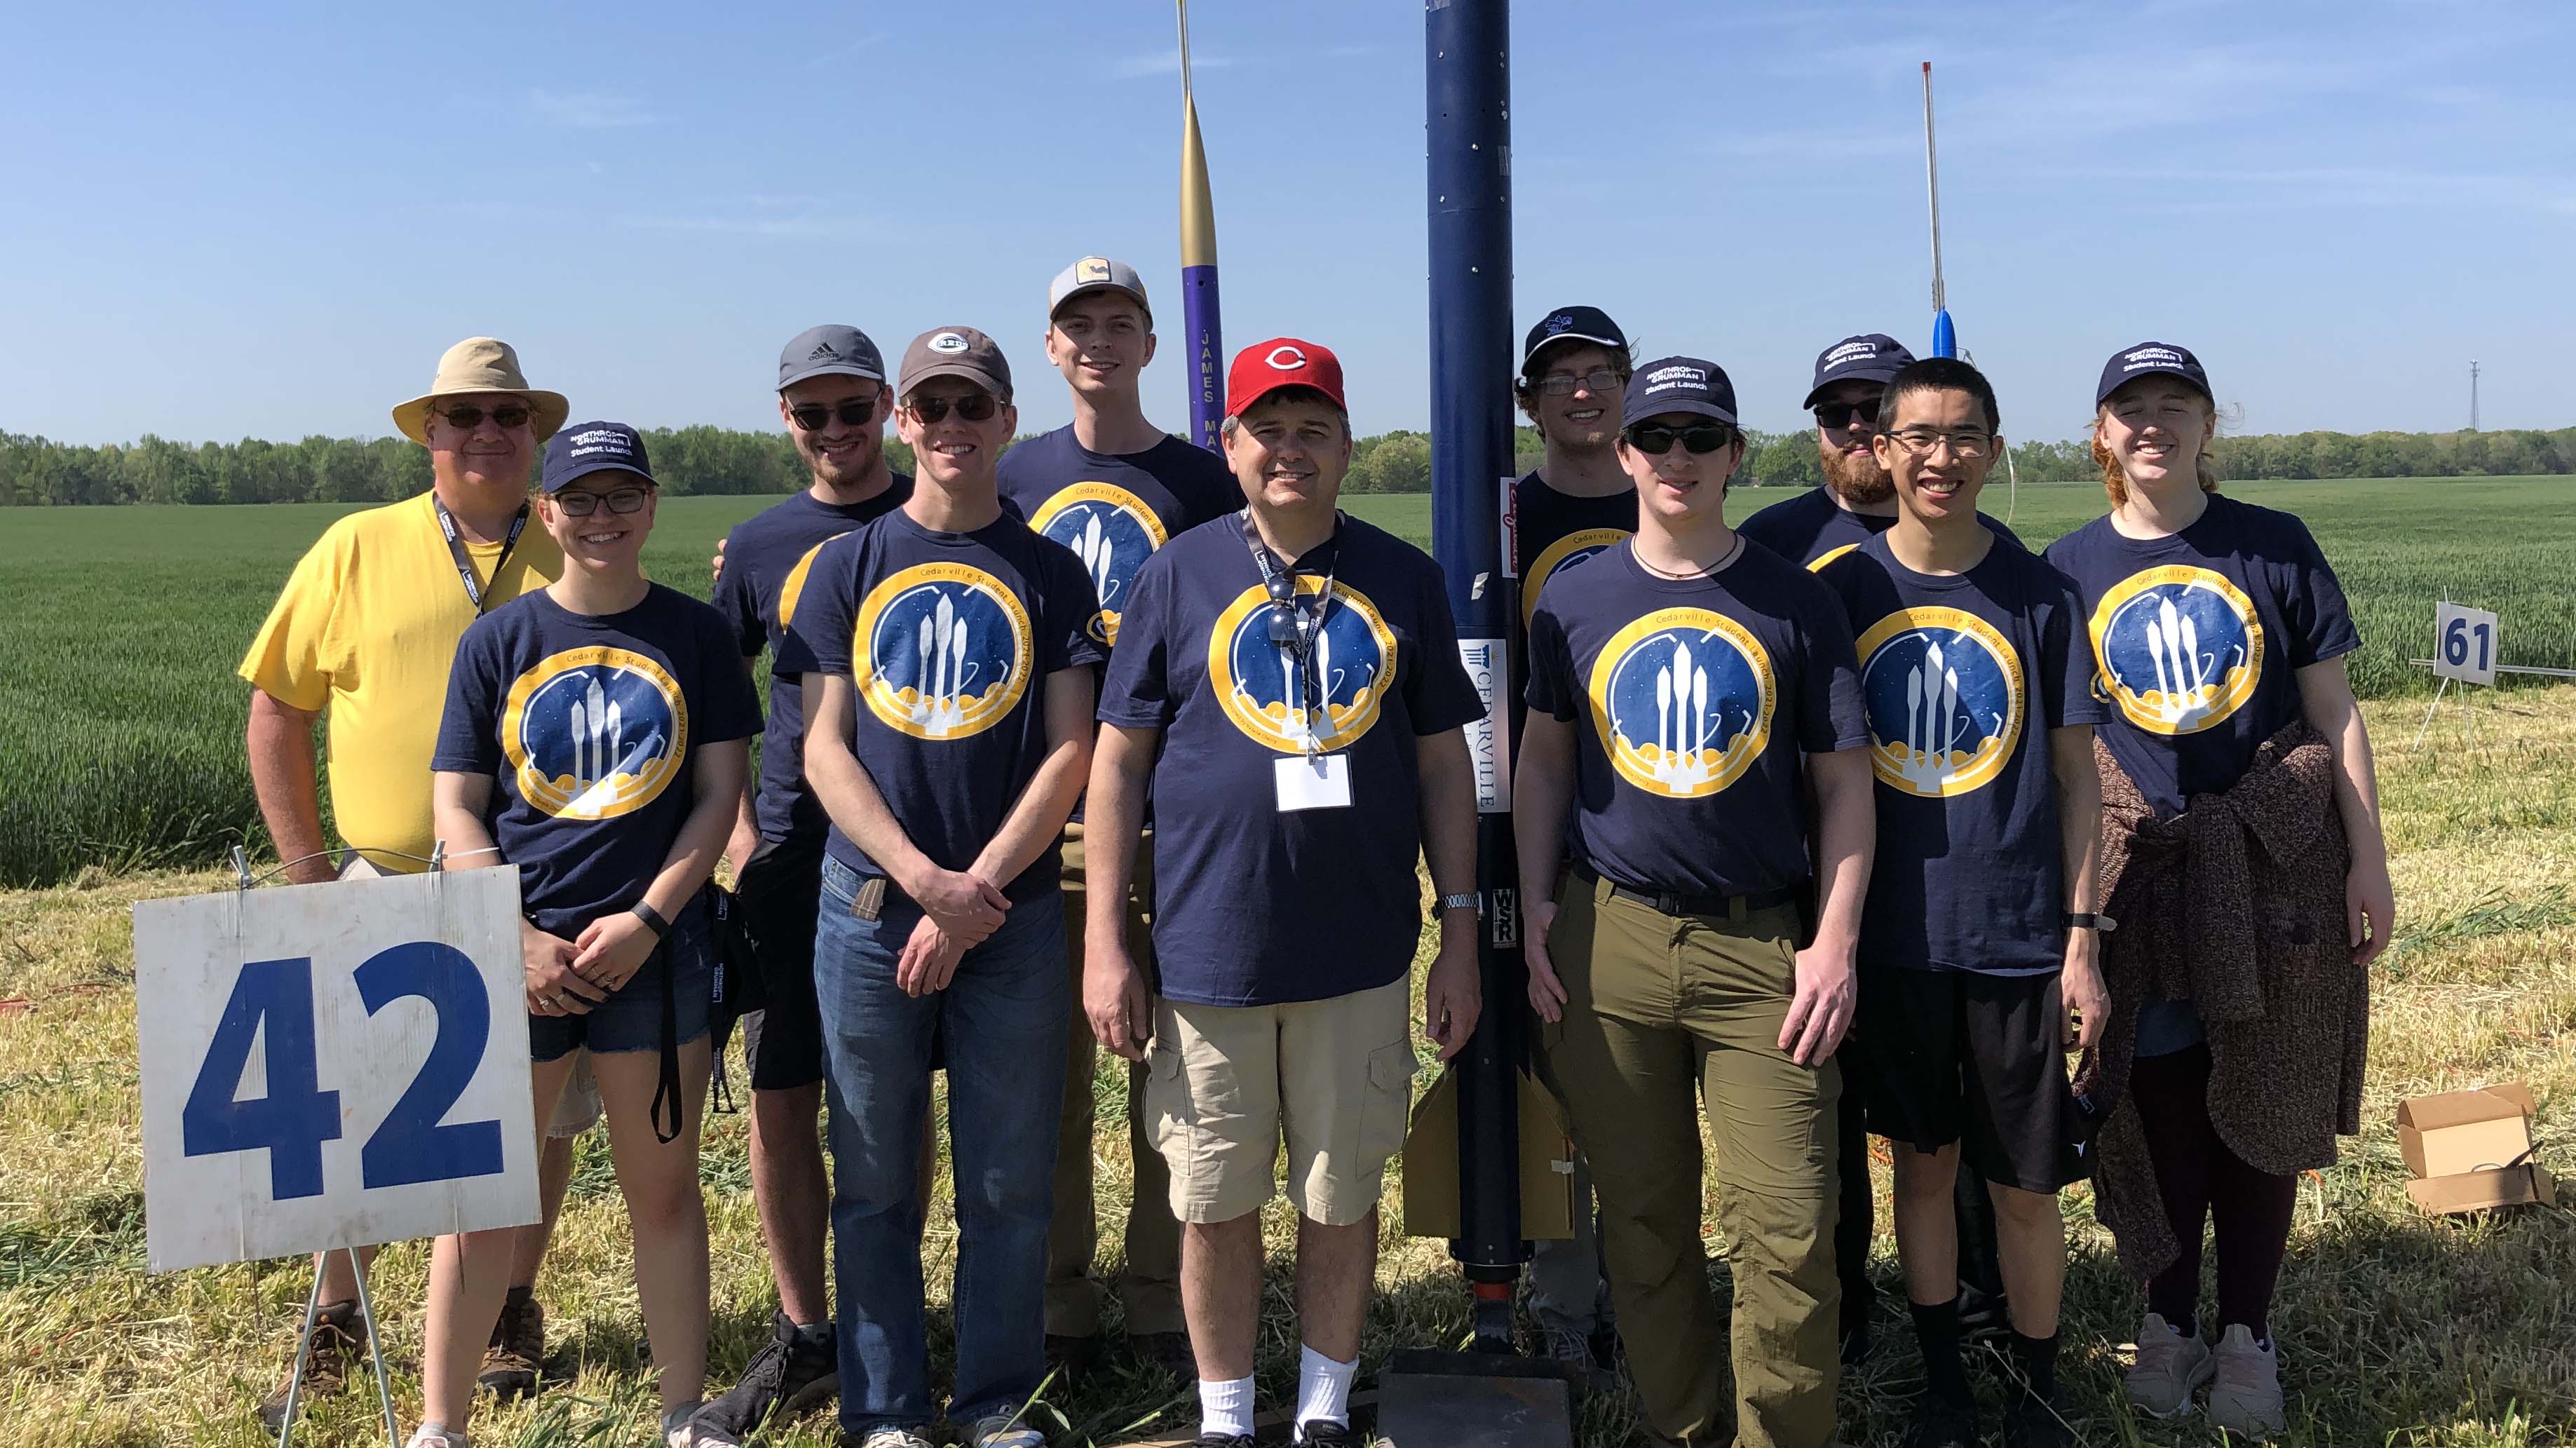 Cedarville's Rocket Launch team competes in NASA competition